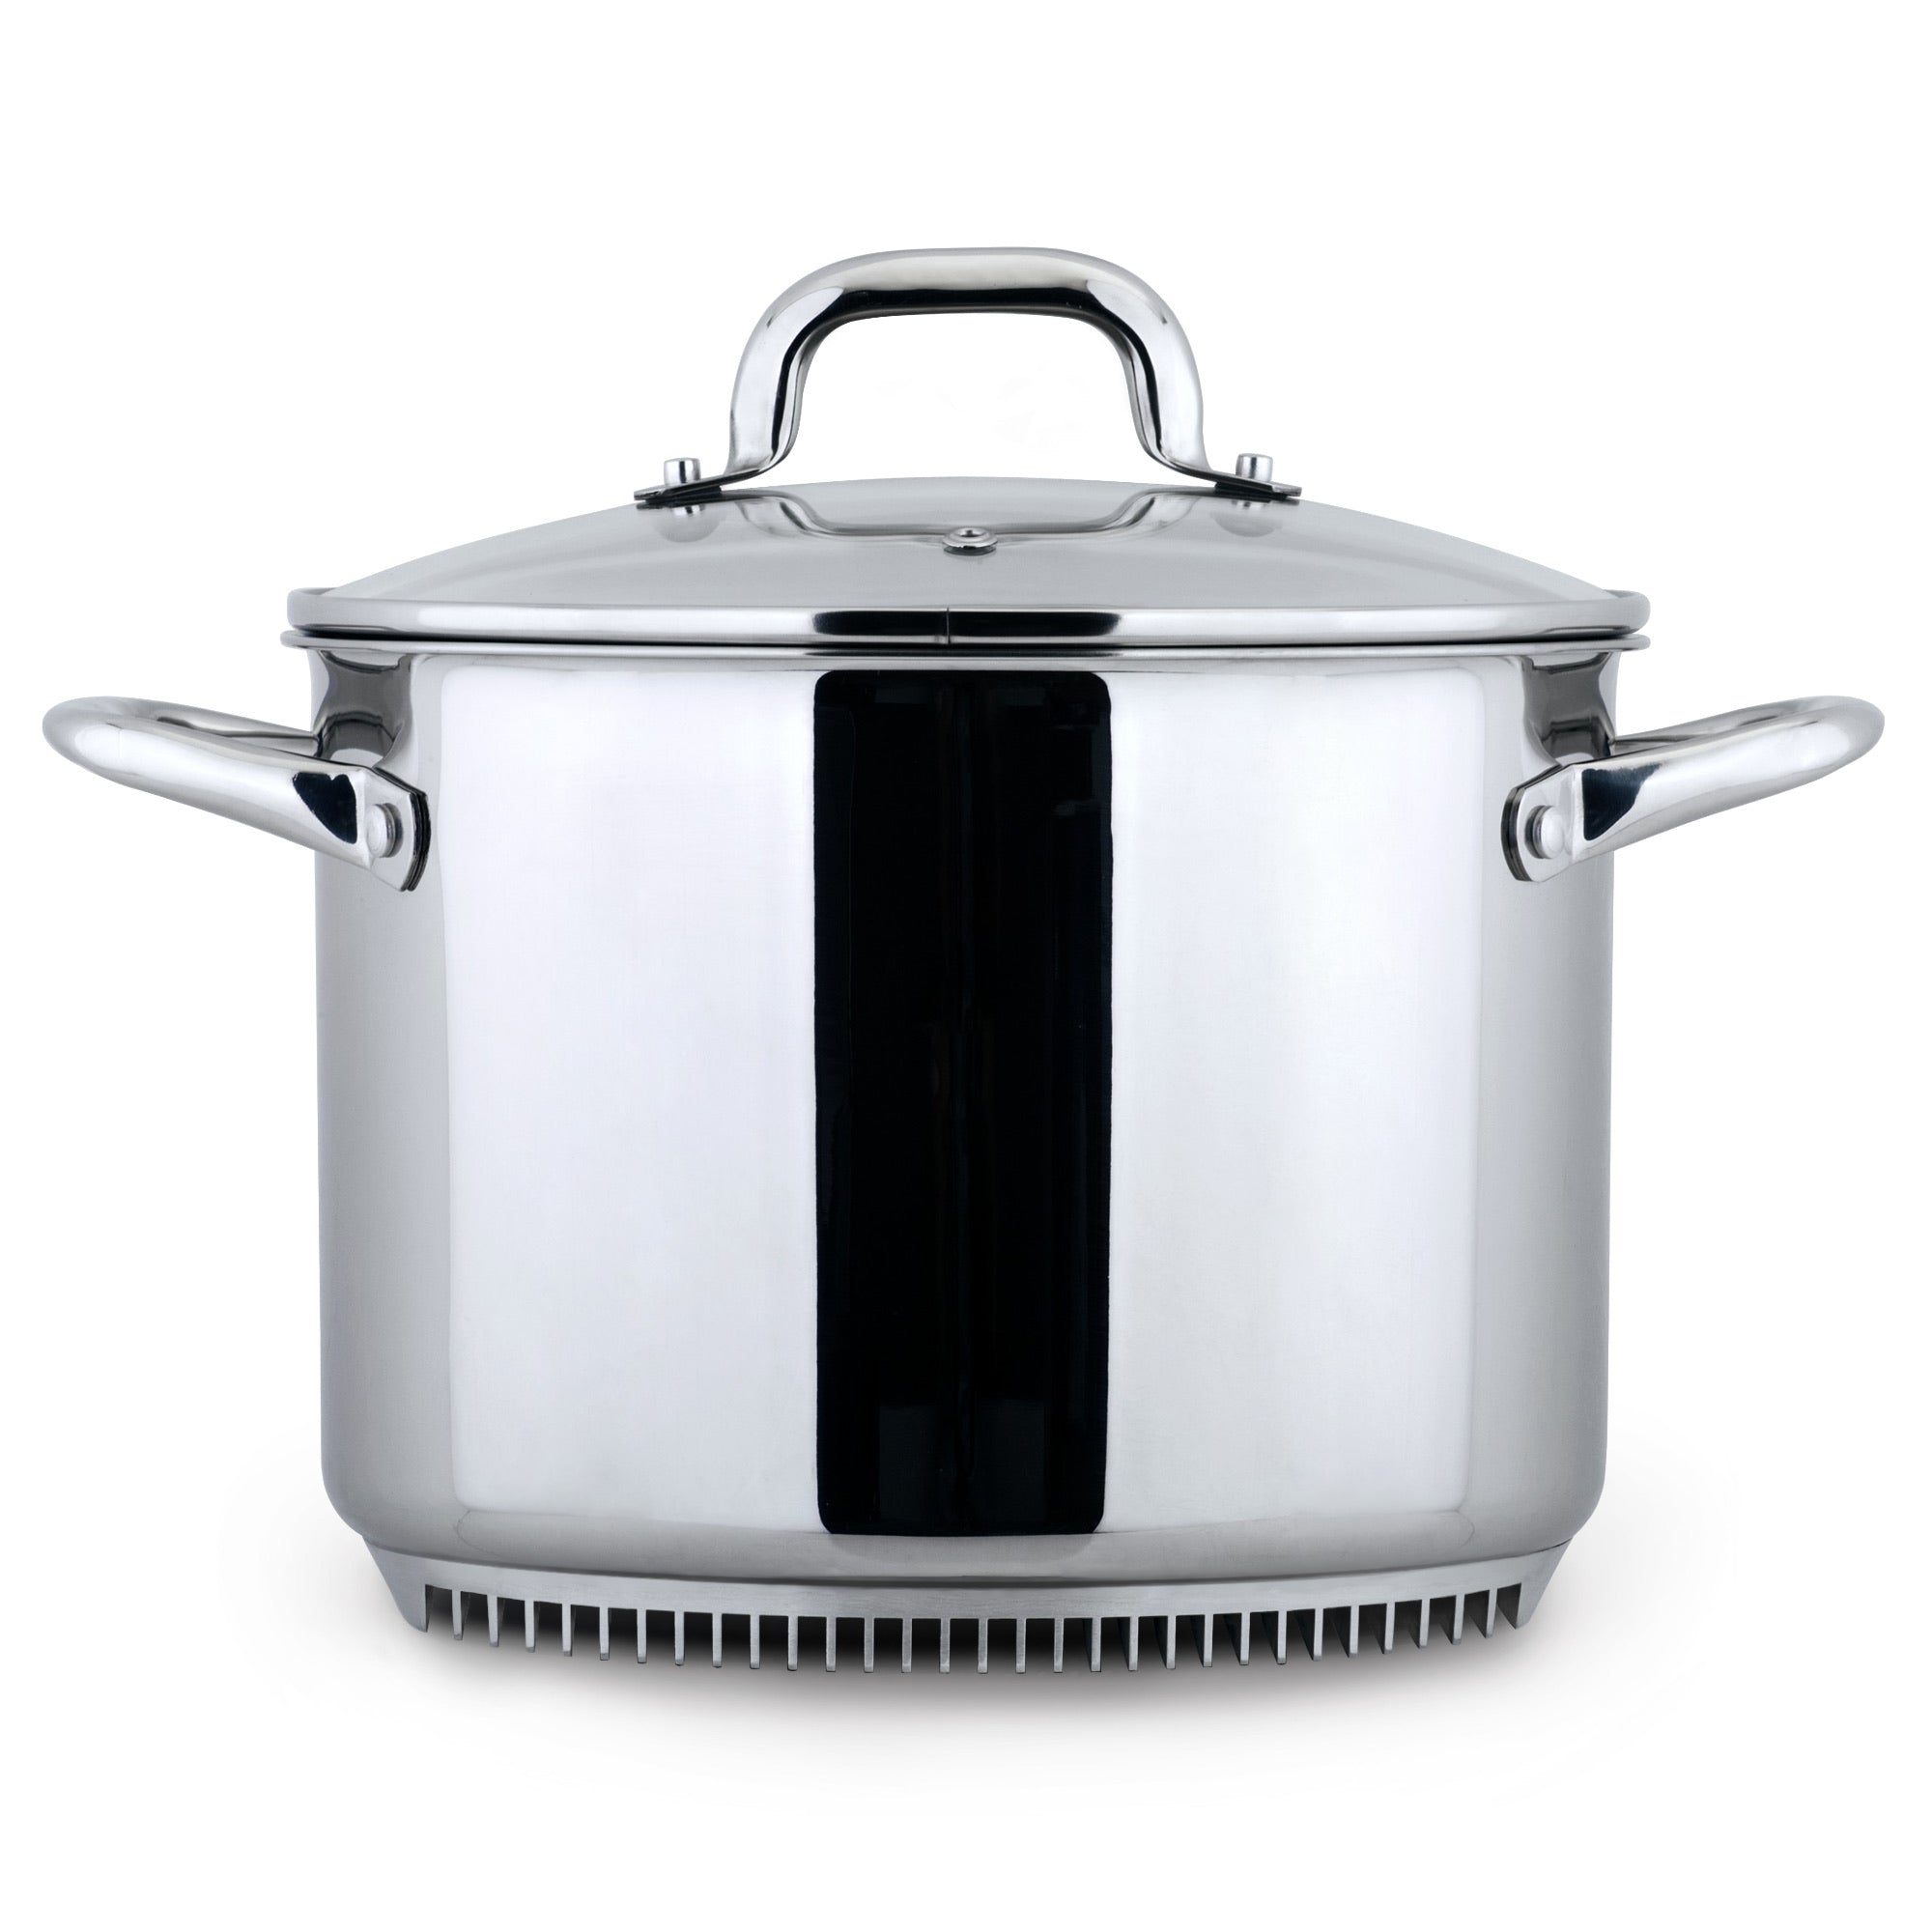 FRESHAIR™ 8 QT. STAINLESS STEEL STOCK POT, TIME-AND-ENERGY SAVING COOK –  Turbo Pot